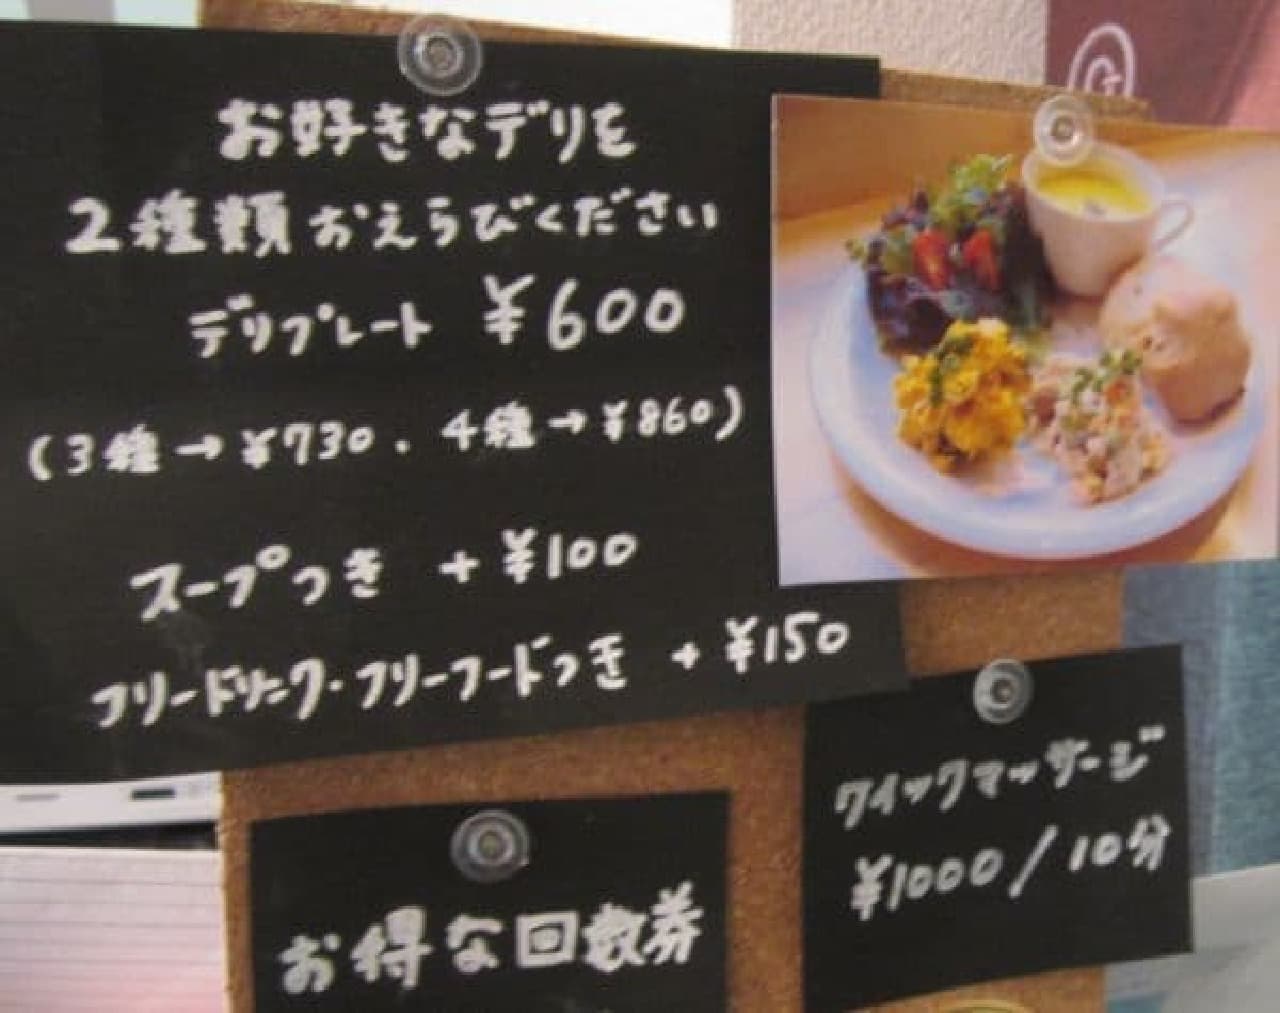 "Choice of deli plates" that you can enjoy at the cafe